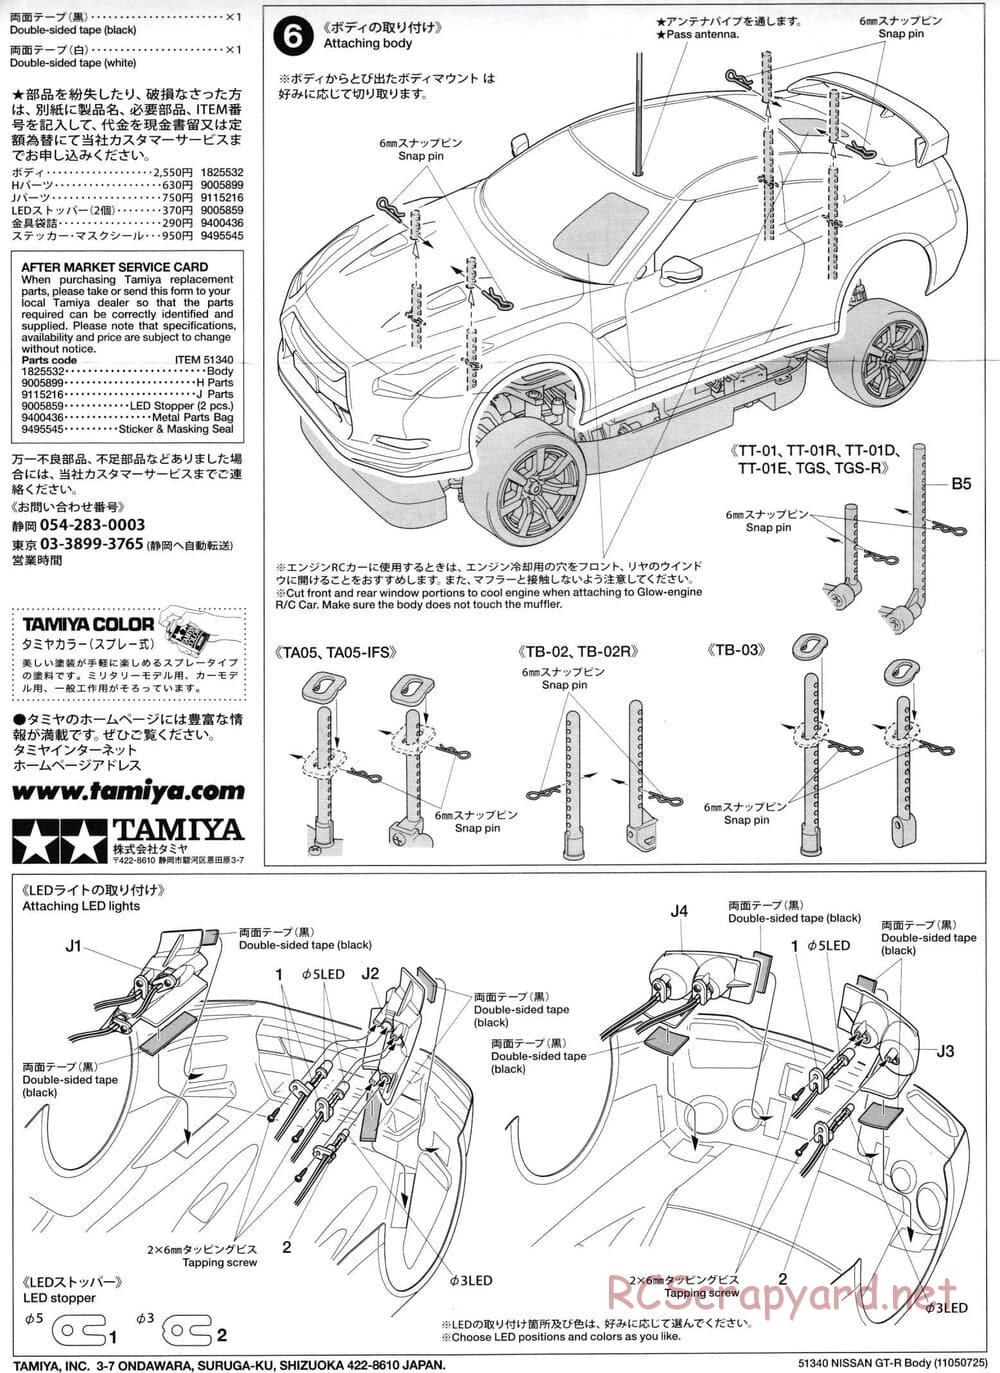 Tamiya - Nissan GT-R - TT-02D Chassis - Body Manual - Page 6